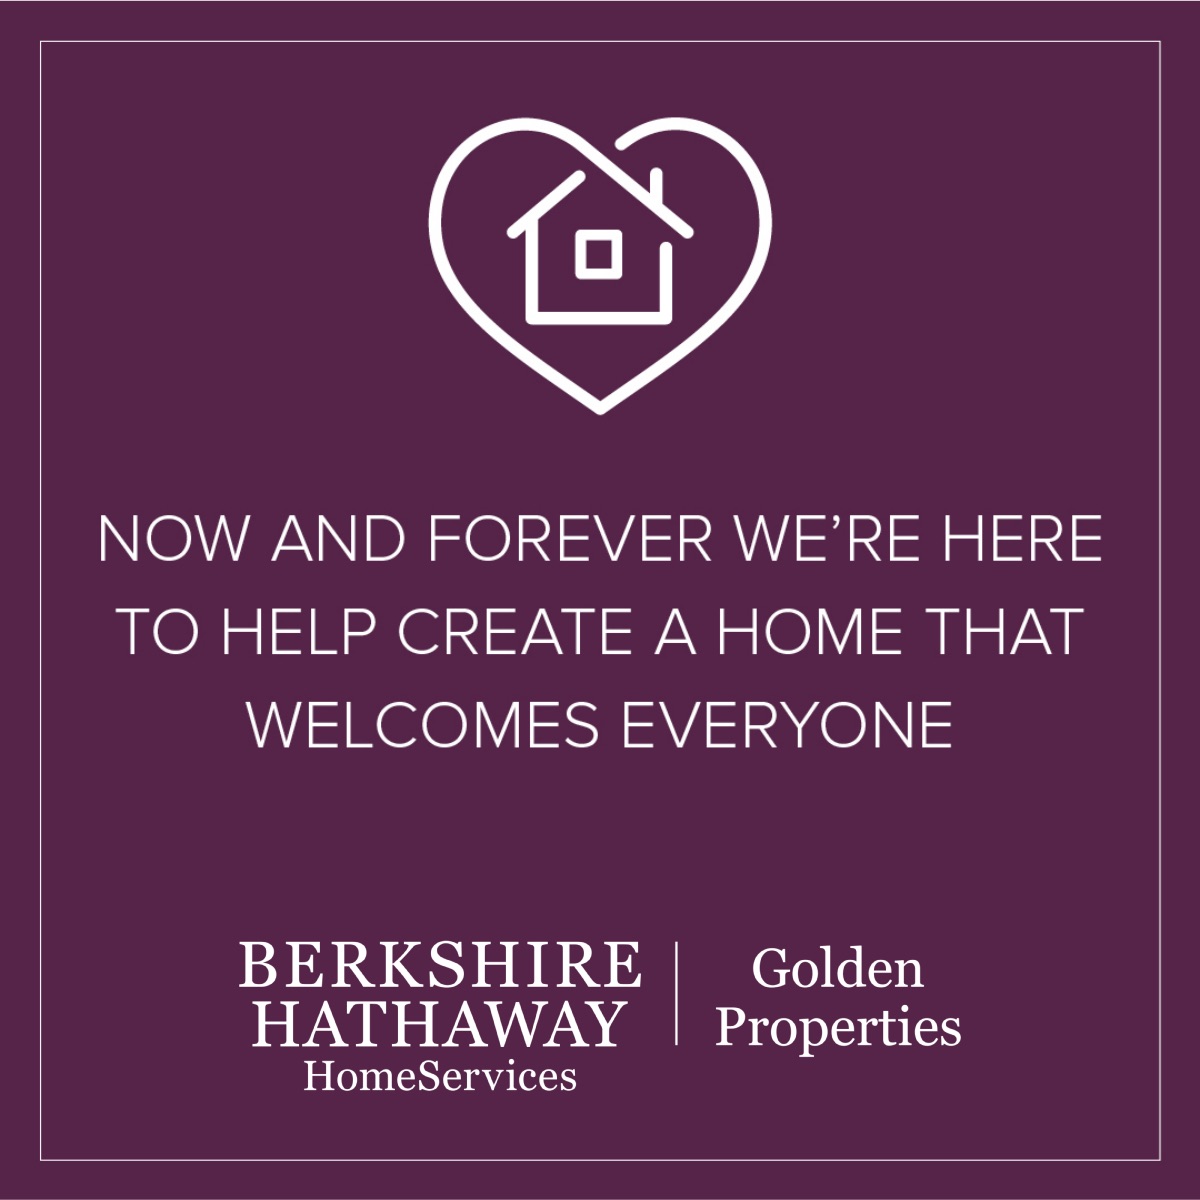 We’re Here to Create A Home That Welcomes Everyone